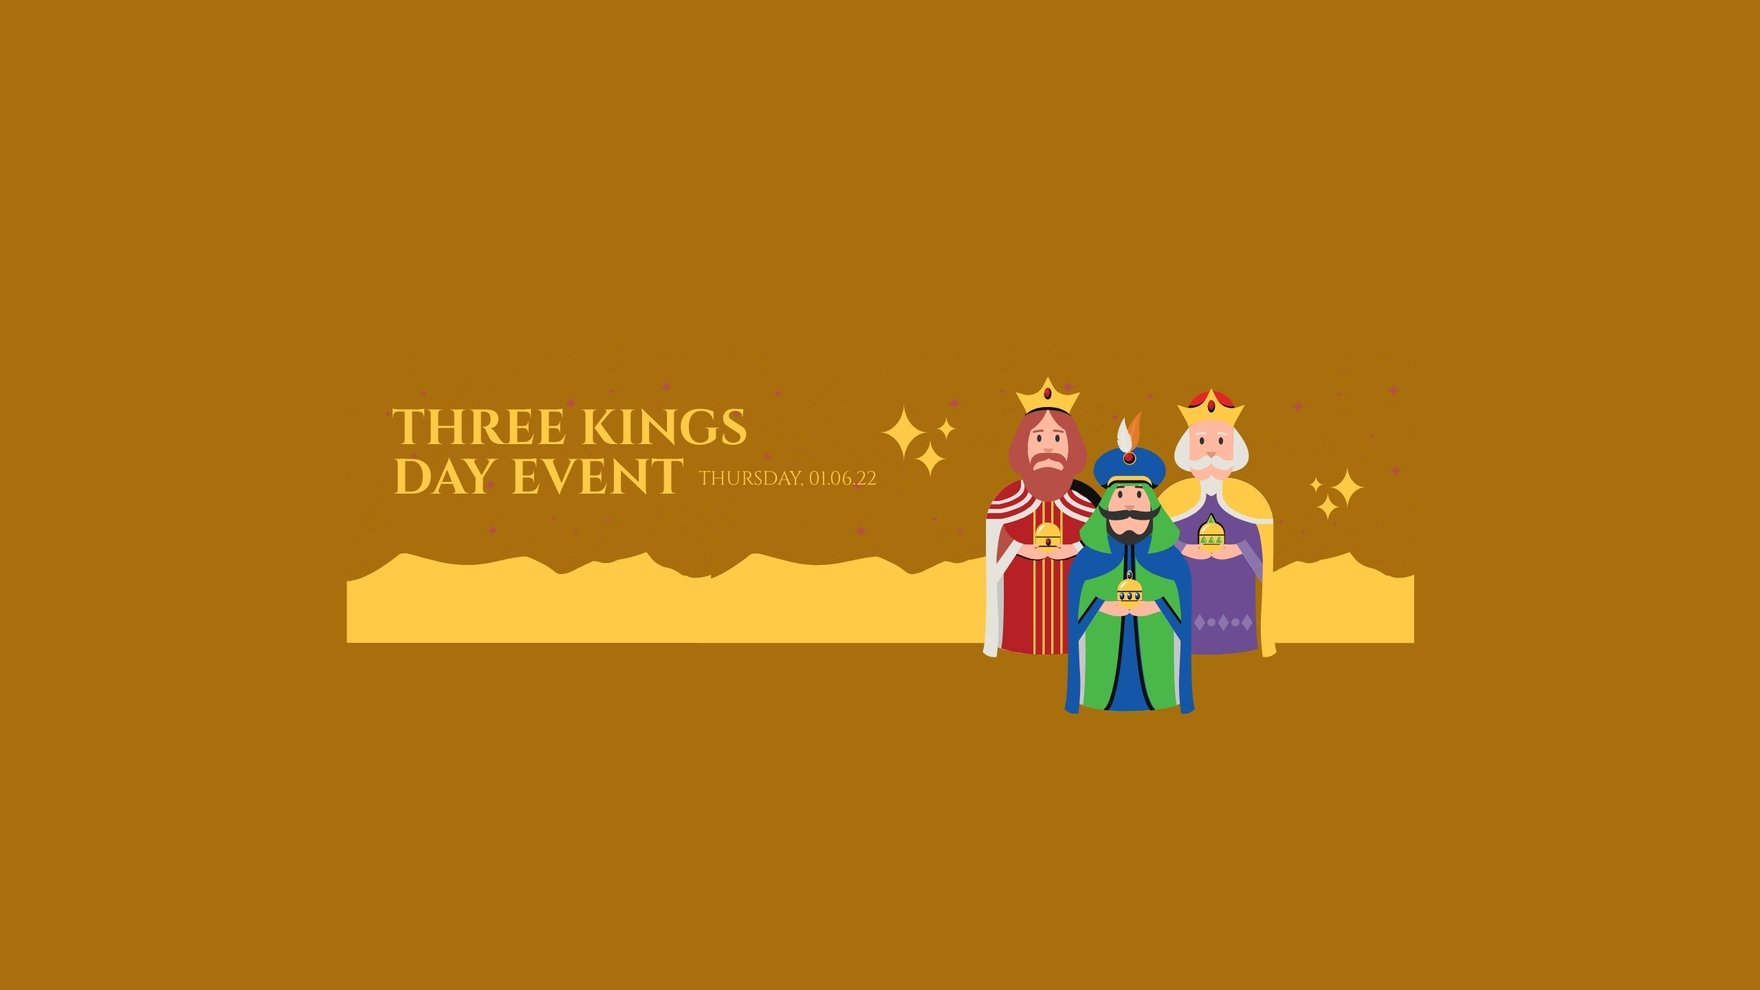 Three Kings Day Event Youtube Banner